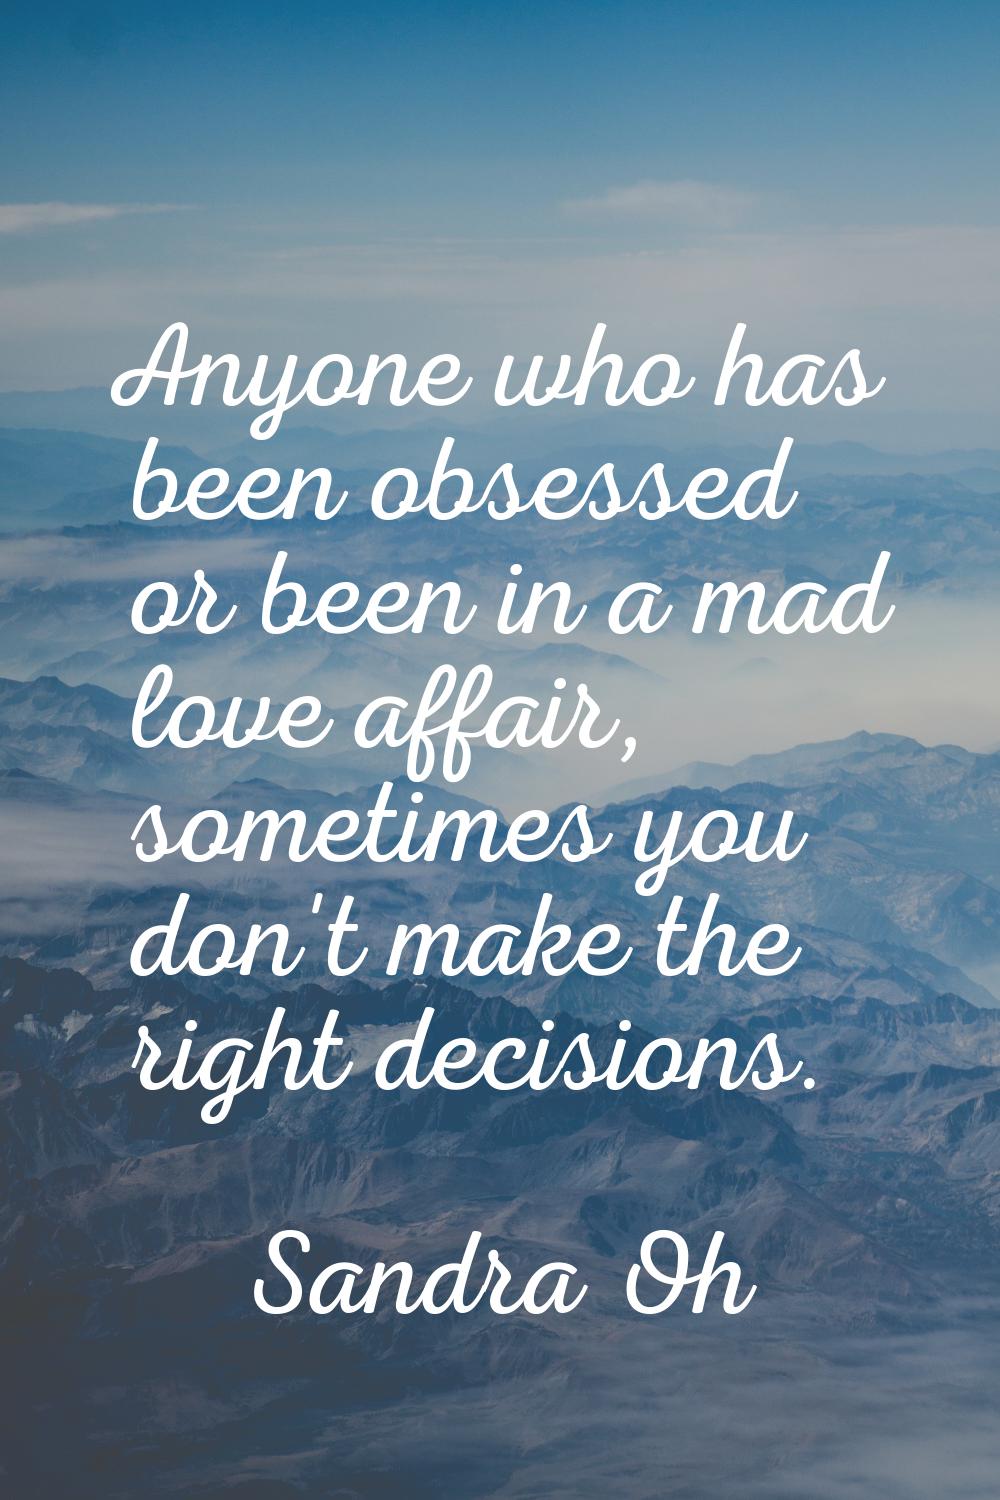 Anyone who has been obsessed or been in a mad love affair, sometimes you don't make the right decis